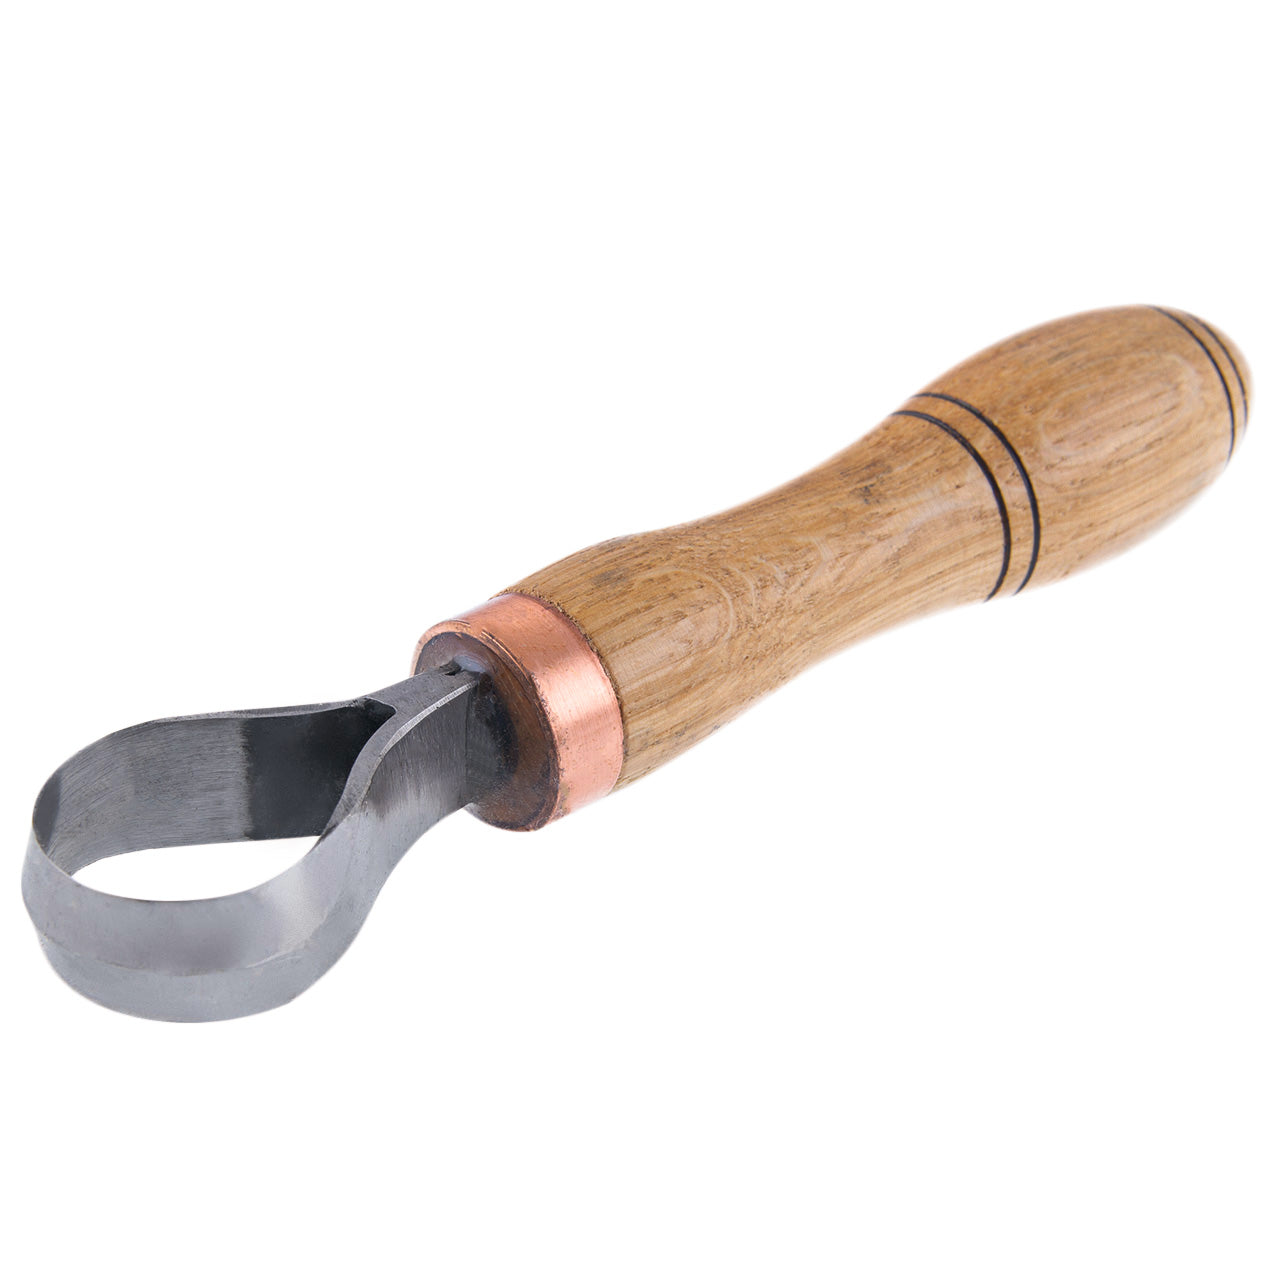 Wood Carving Scorp Hook Knife. Round Carving Tool for Spoons, Bowls and Cups - STAMESKY